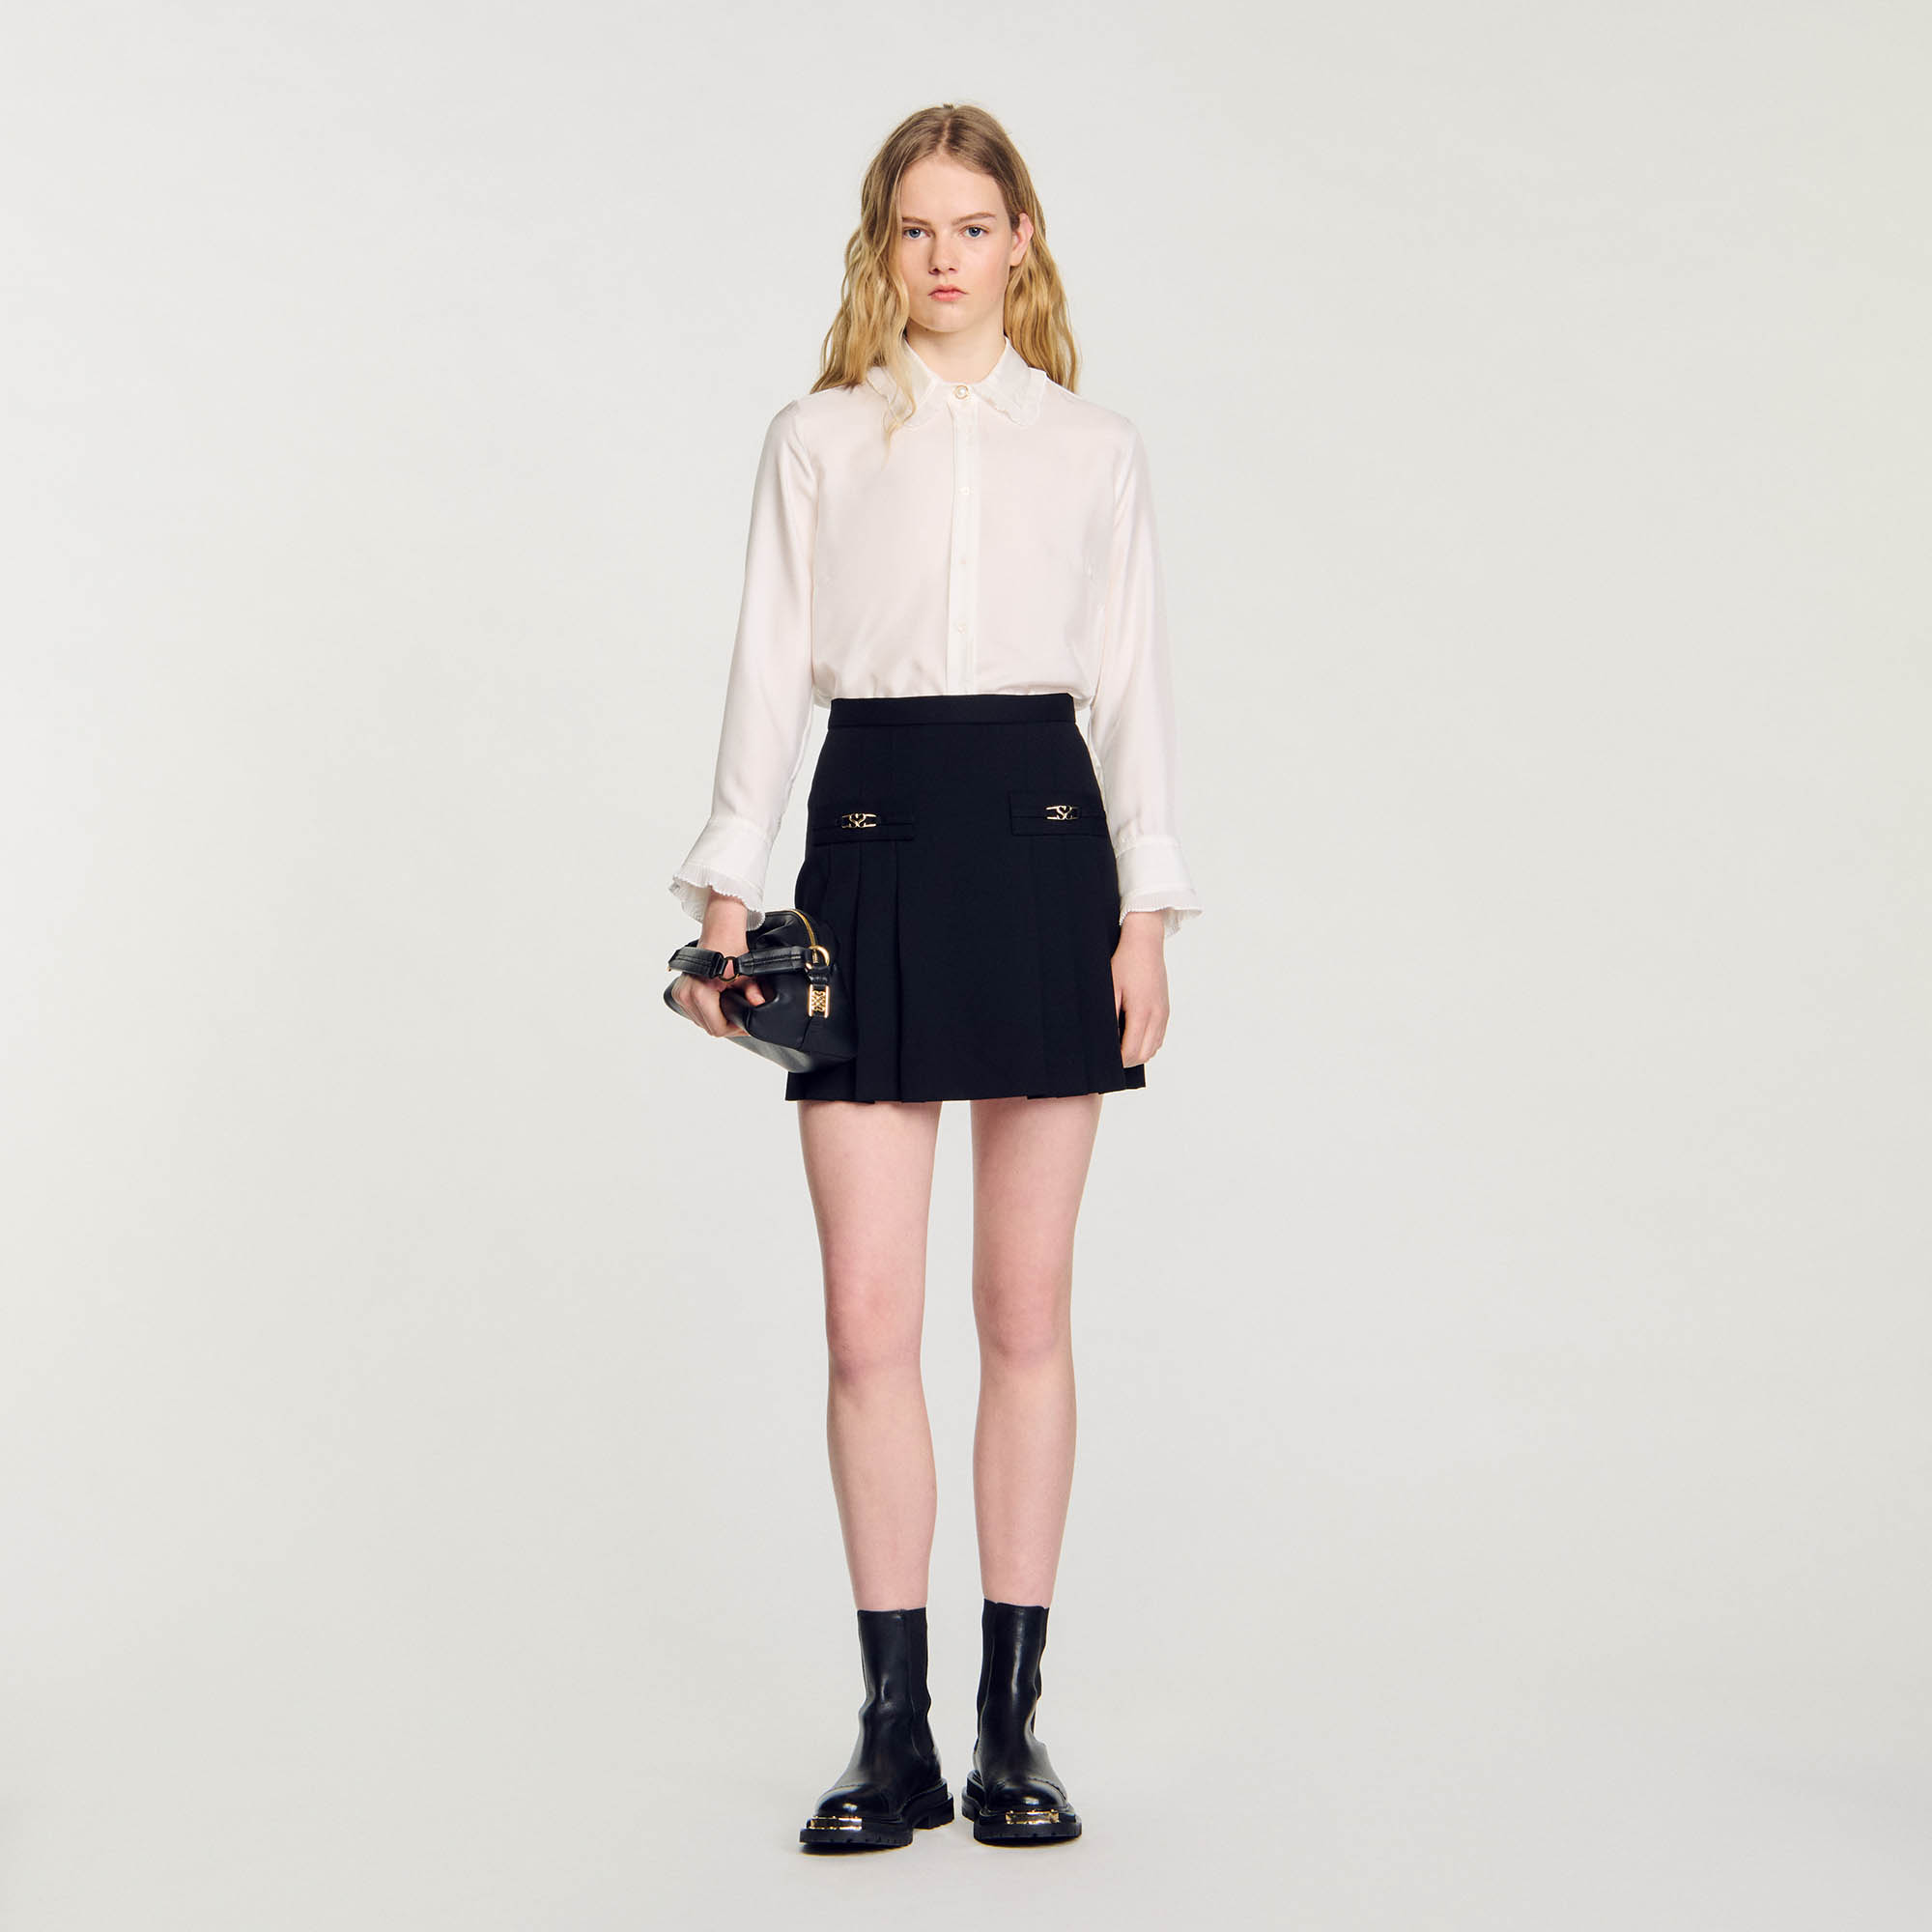 Sandro wool Sandro women's skirt â€¢ Short skirt with stitched pleats â€¢ Large trompe l'oeil piped pockets with fancy buckle created by our studio â€¢ Mid-thigh length â€¢ Fastened with a concealed zip at the center back â€¢ Model is wearing a size 36/Uk 8/Us 2-4 â€¢ Model measures 177 cm